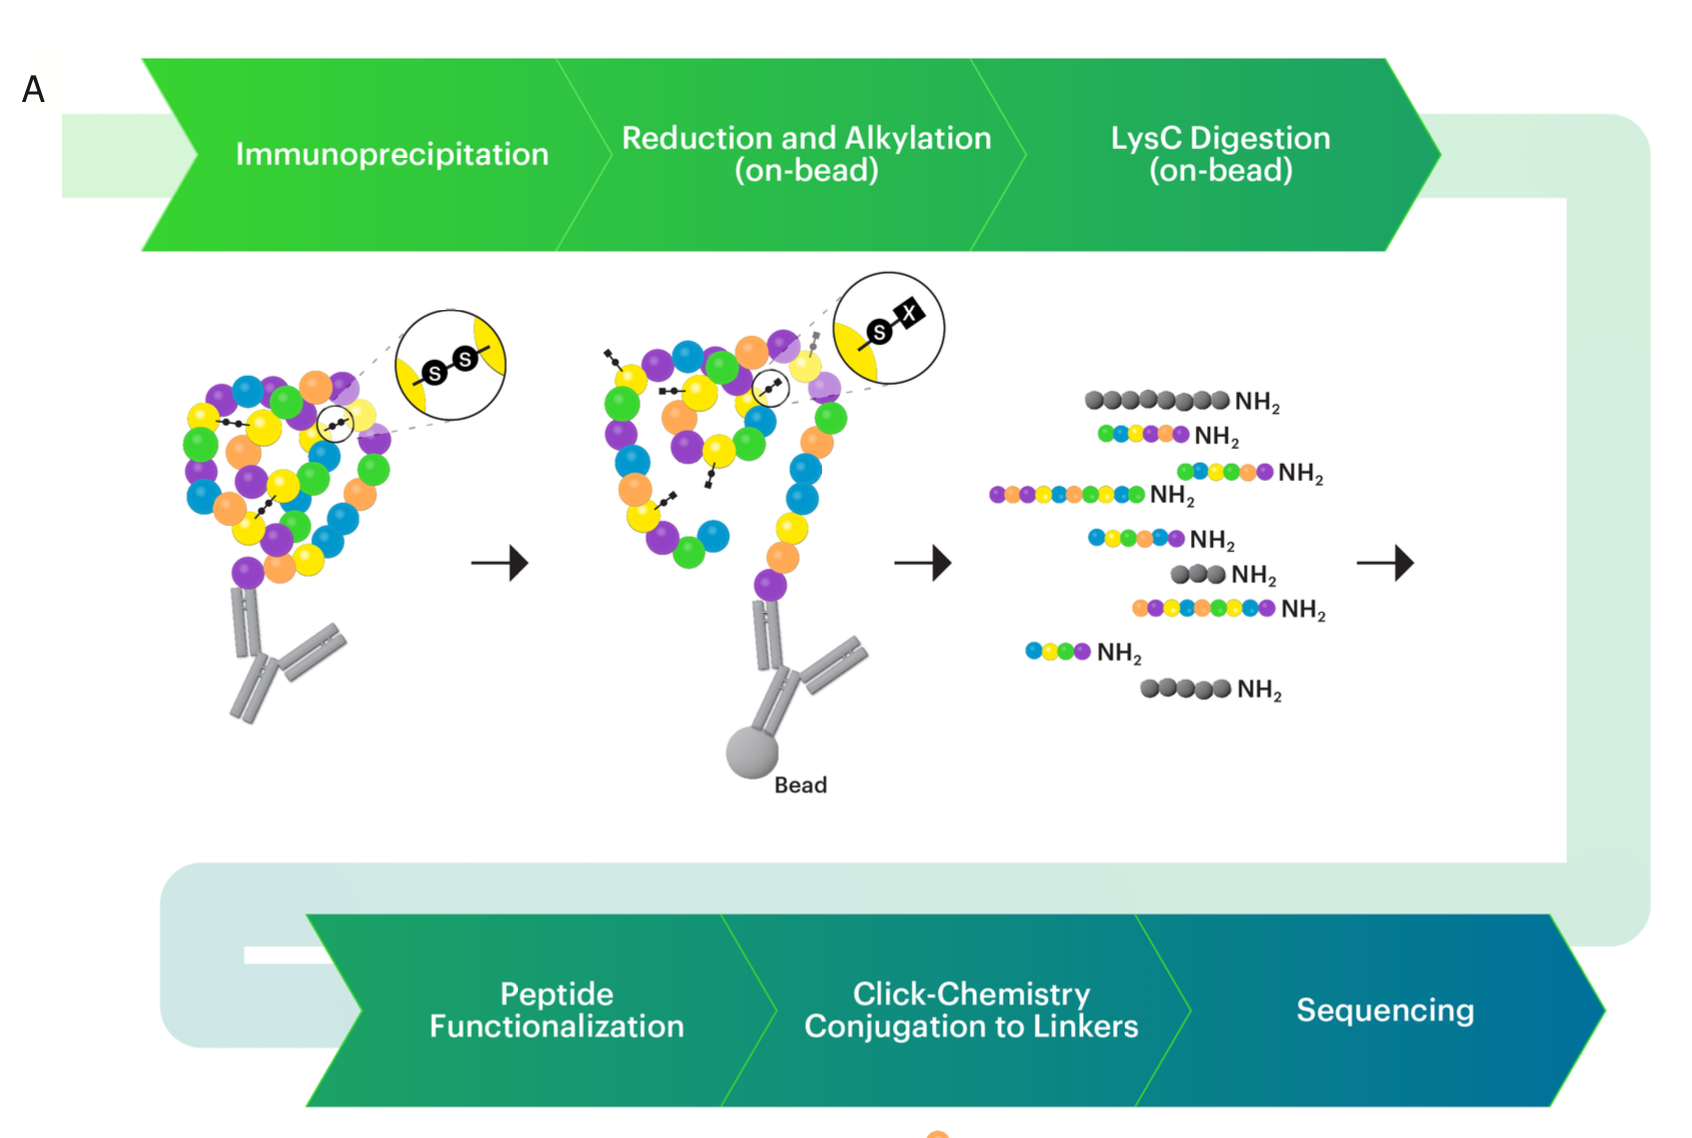 Immunoprecipitation of IL-6 from Human Serum for Next-Generation Protein Sequencing™ on Platinum™